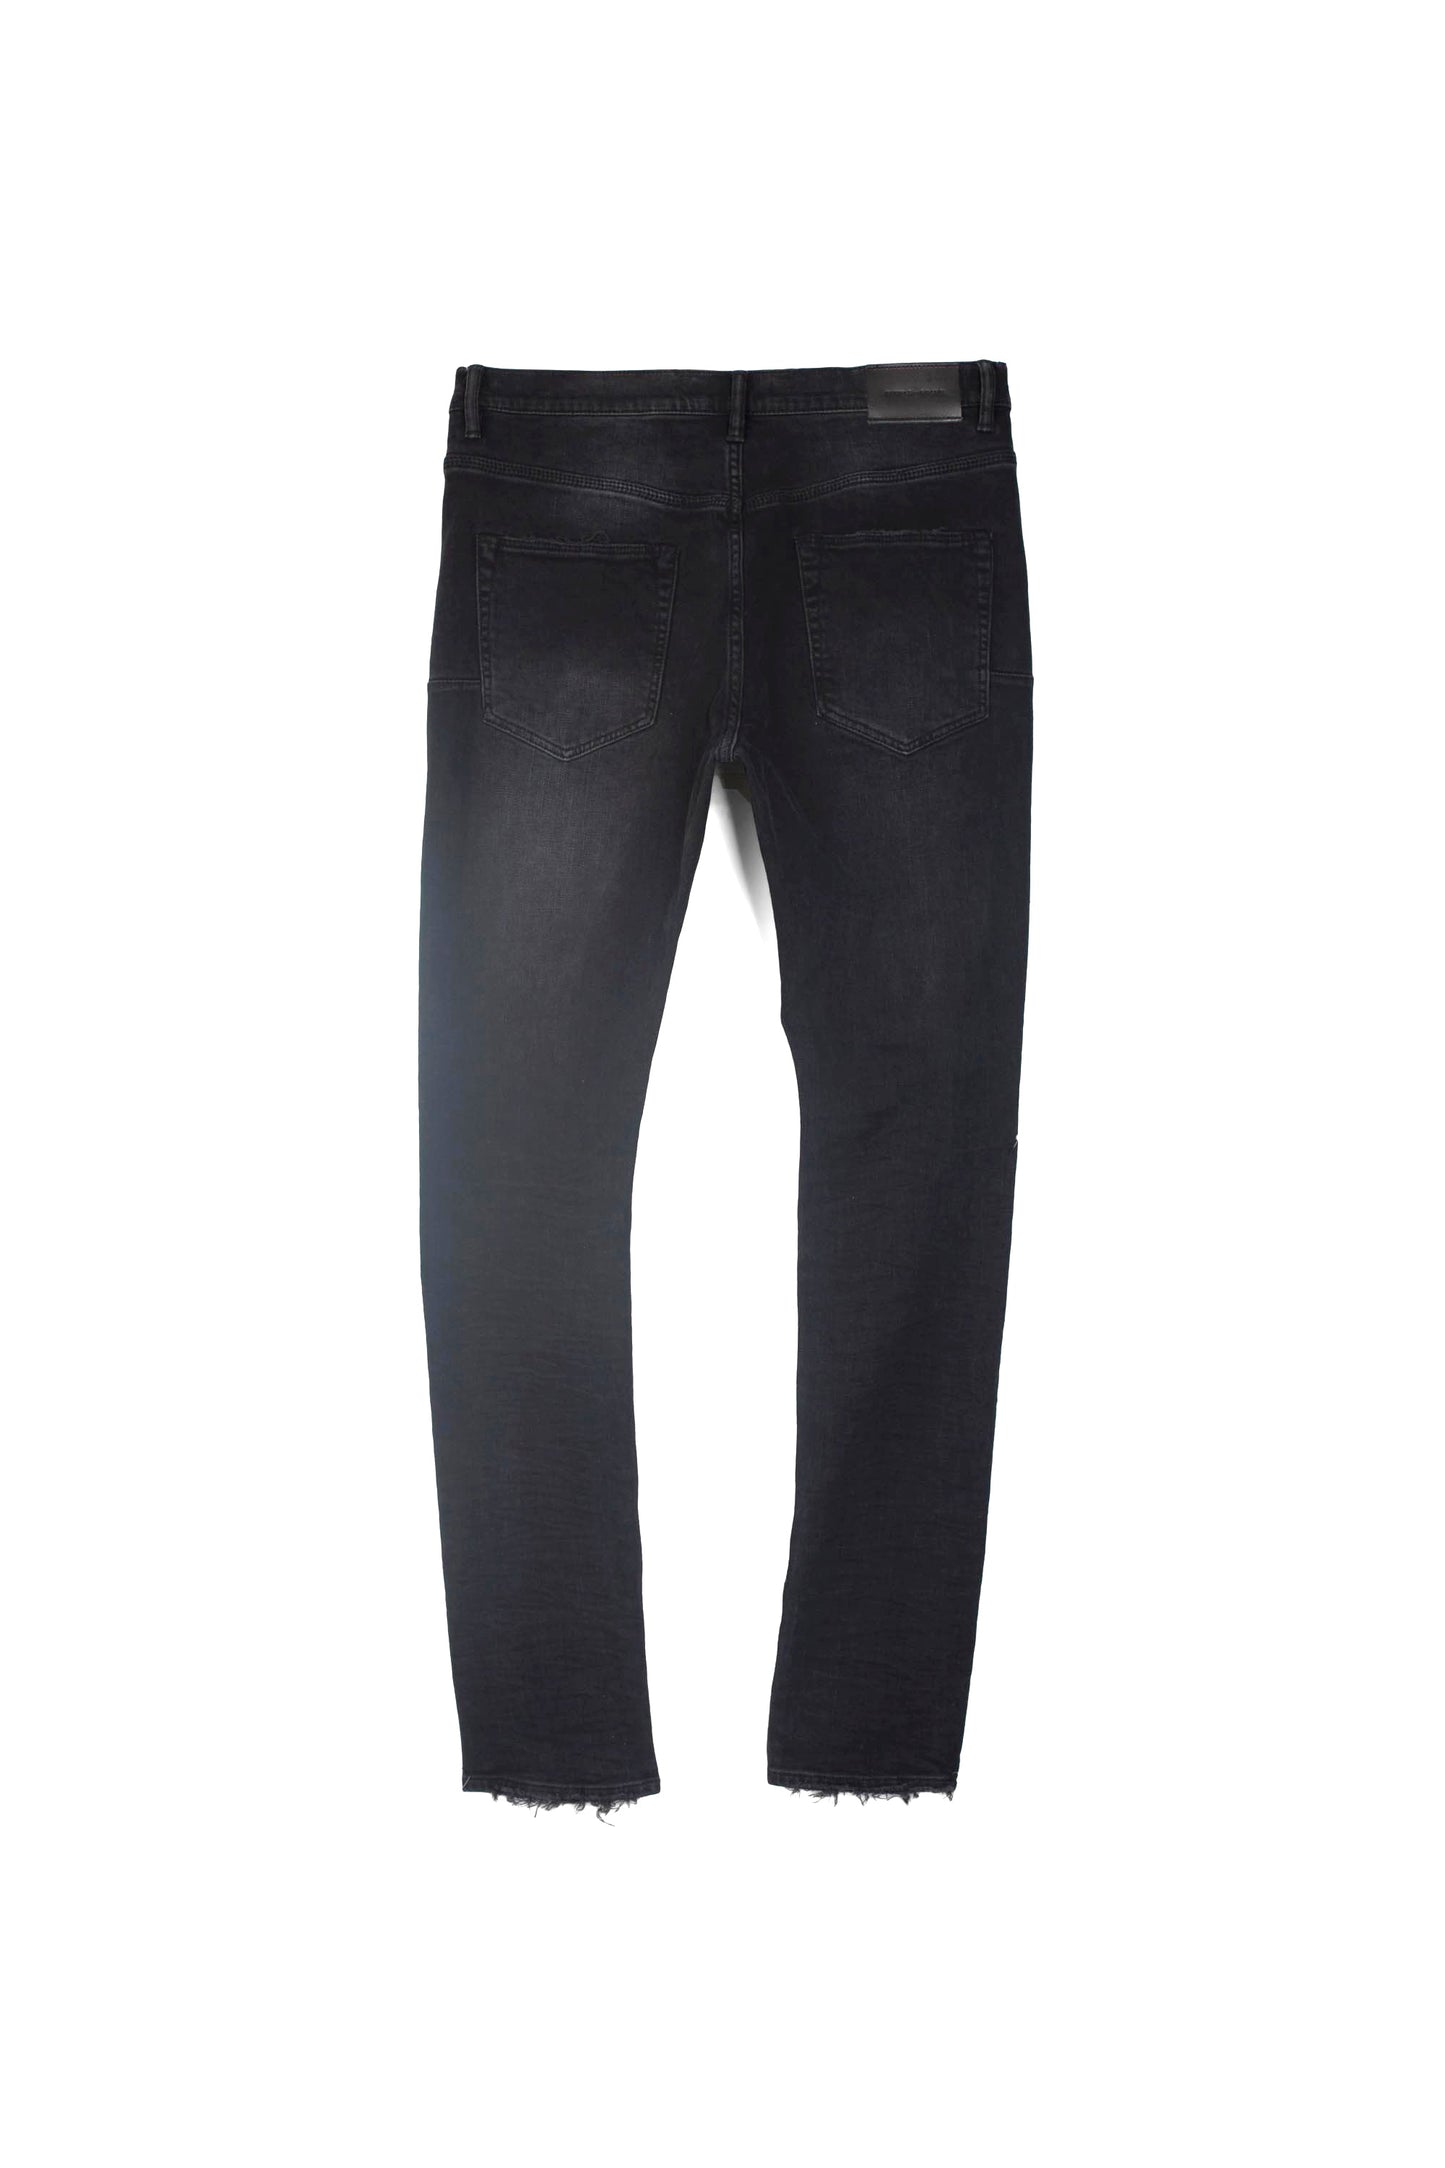 Purple Brand Jeans Mens , Style: Slim Fit Low Rise